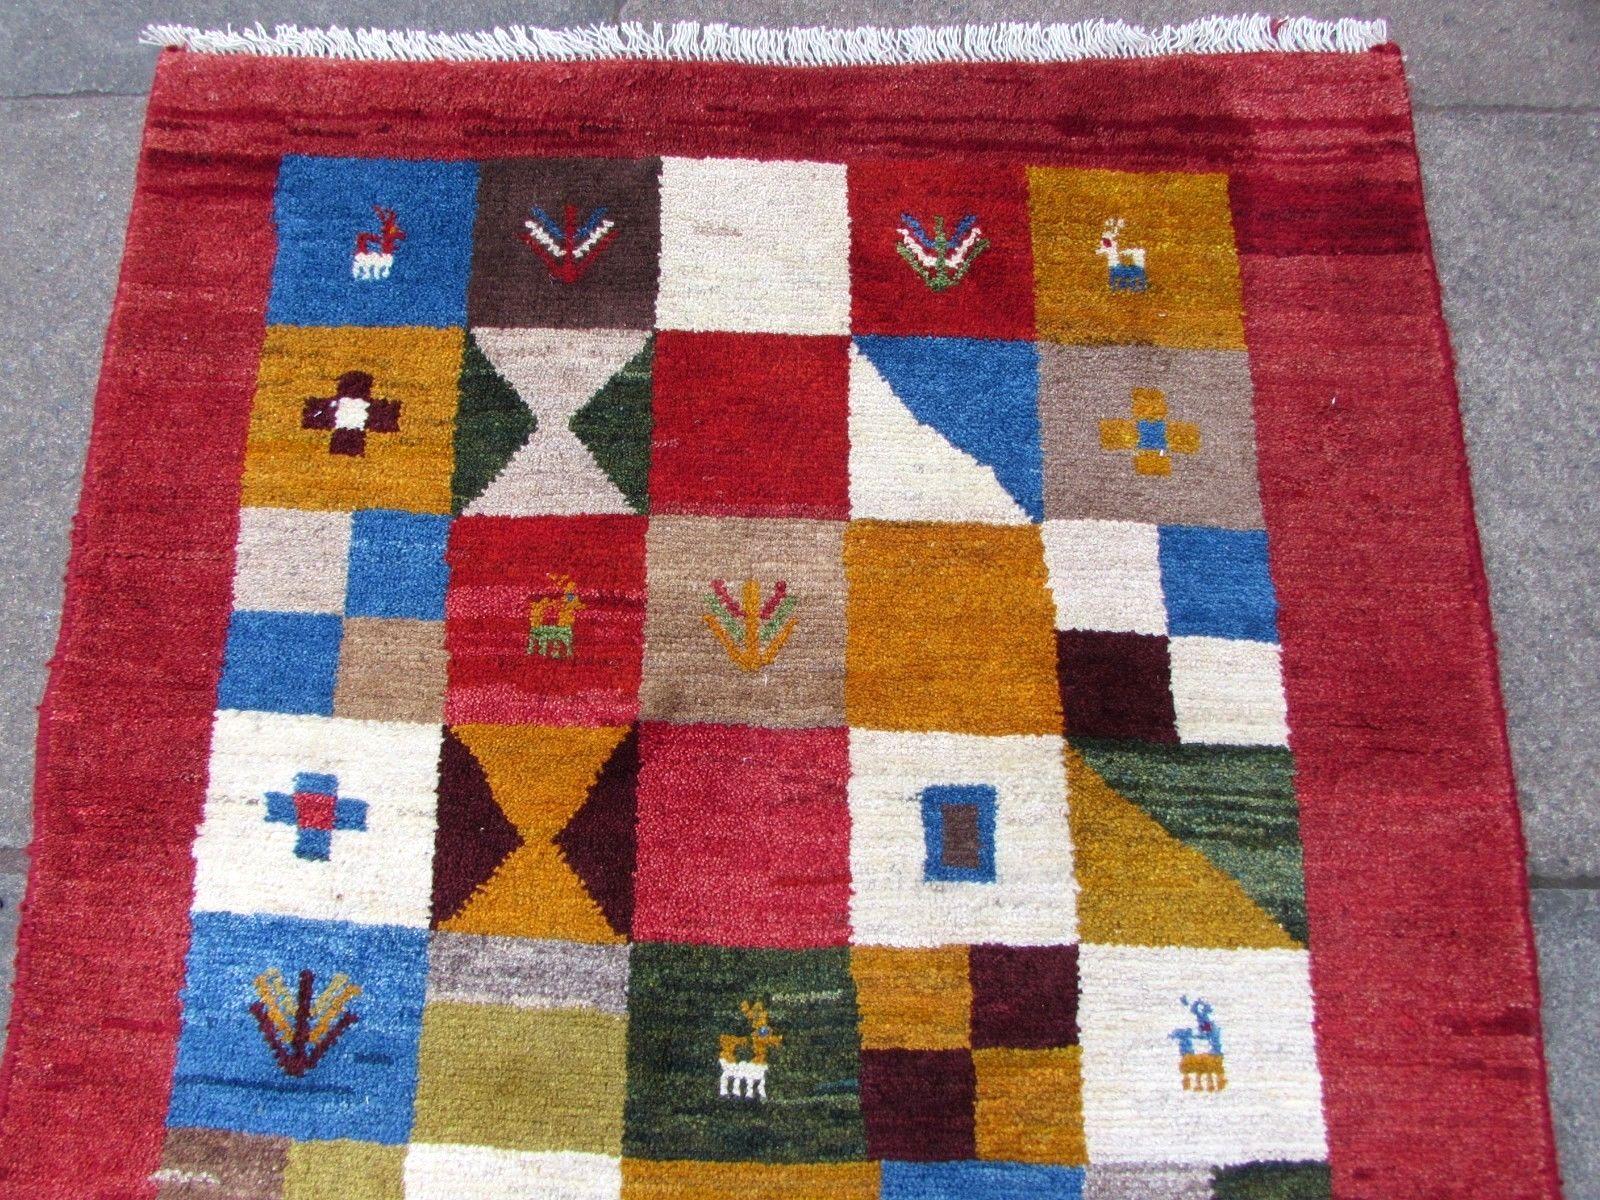 Handmade vintage Gabbeh rug in colorful wool. The rug is from the end of 20th century in original good condition.

- Condition: Original good,

- circa 1970s,

- Size: 3.3' x 4.8' (102cm x 146cm),

- Material: Wool,

- Country of origin: